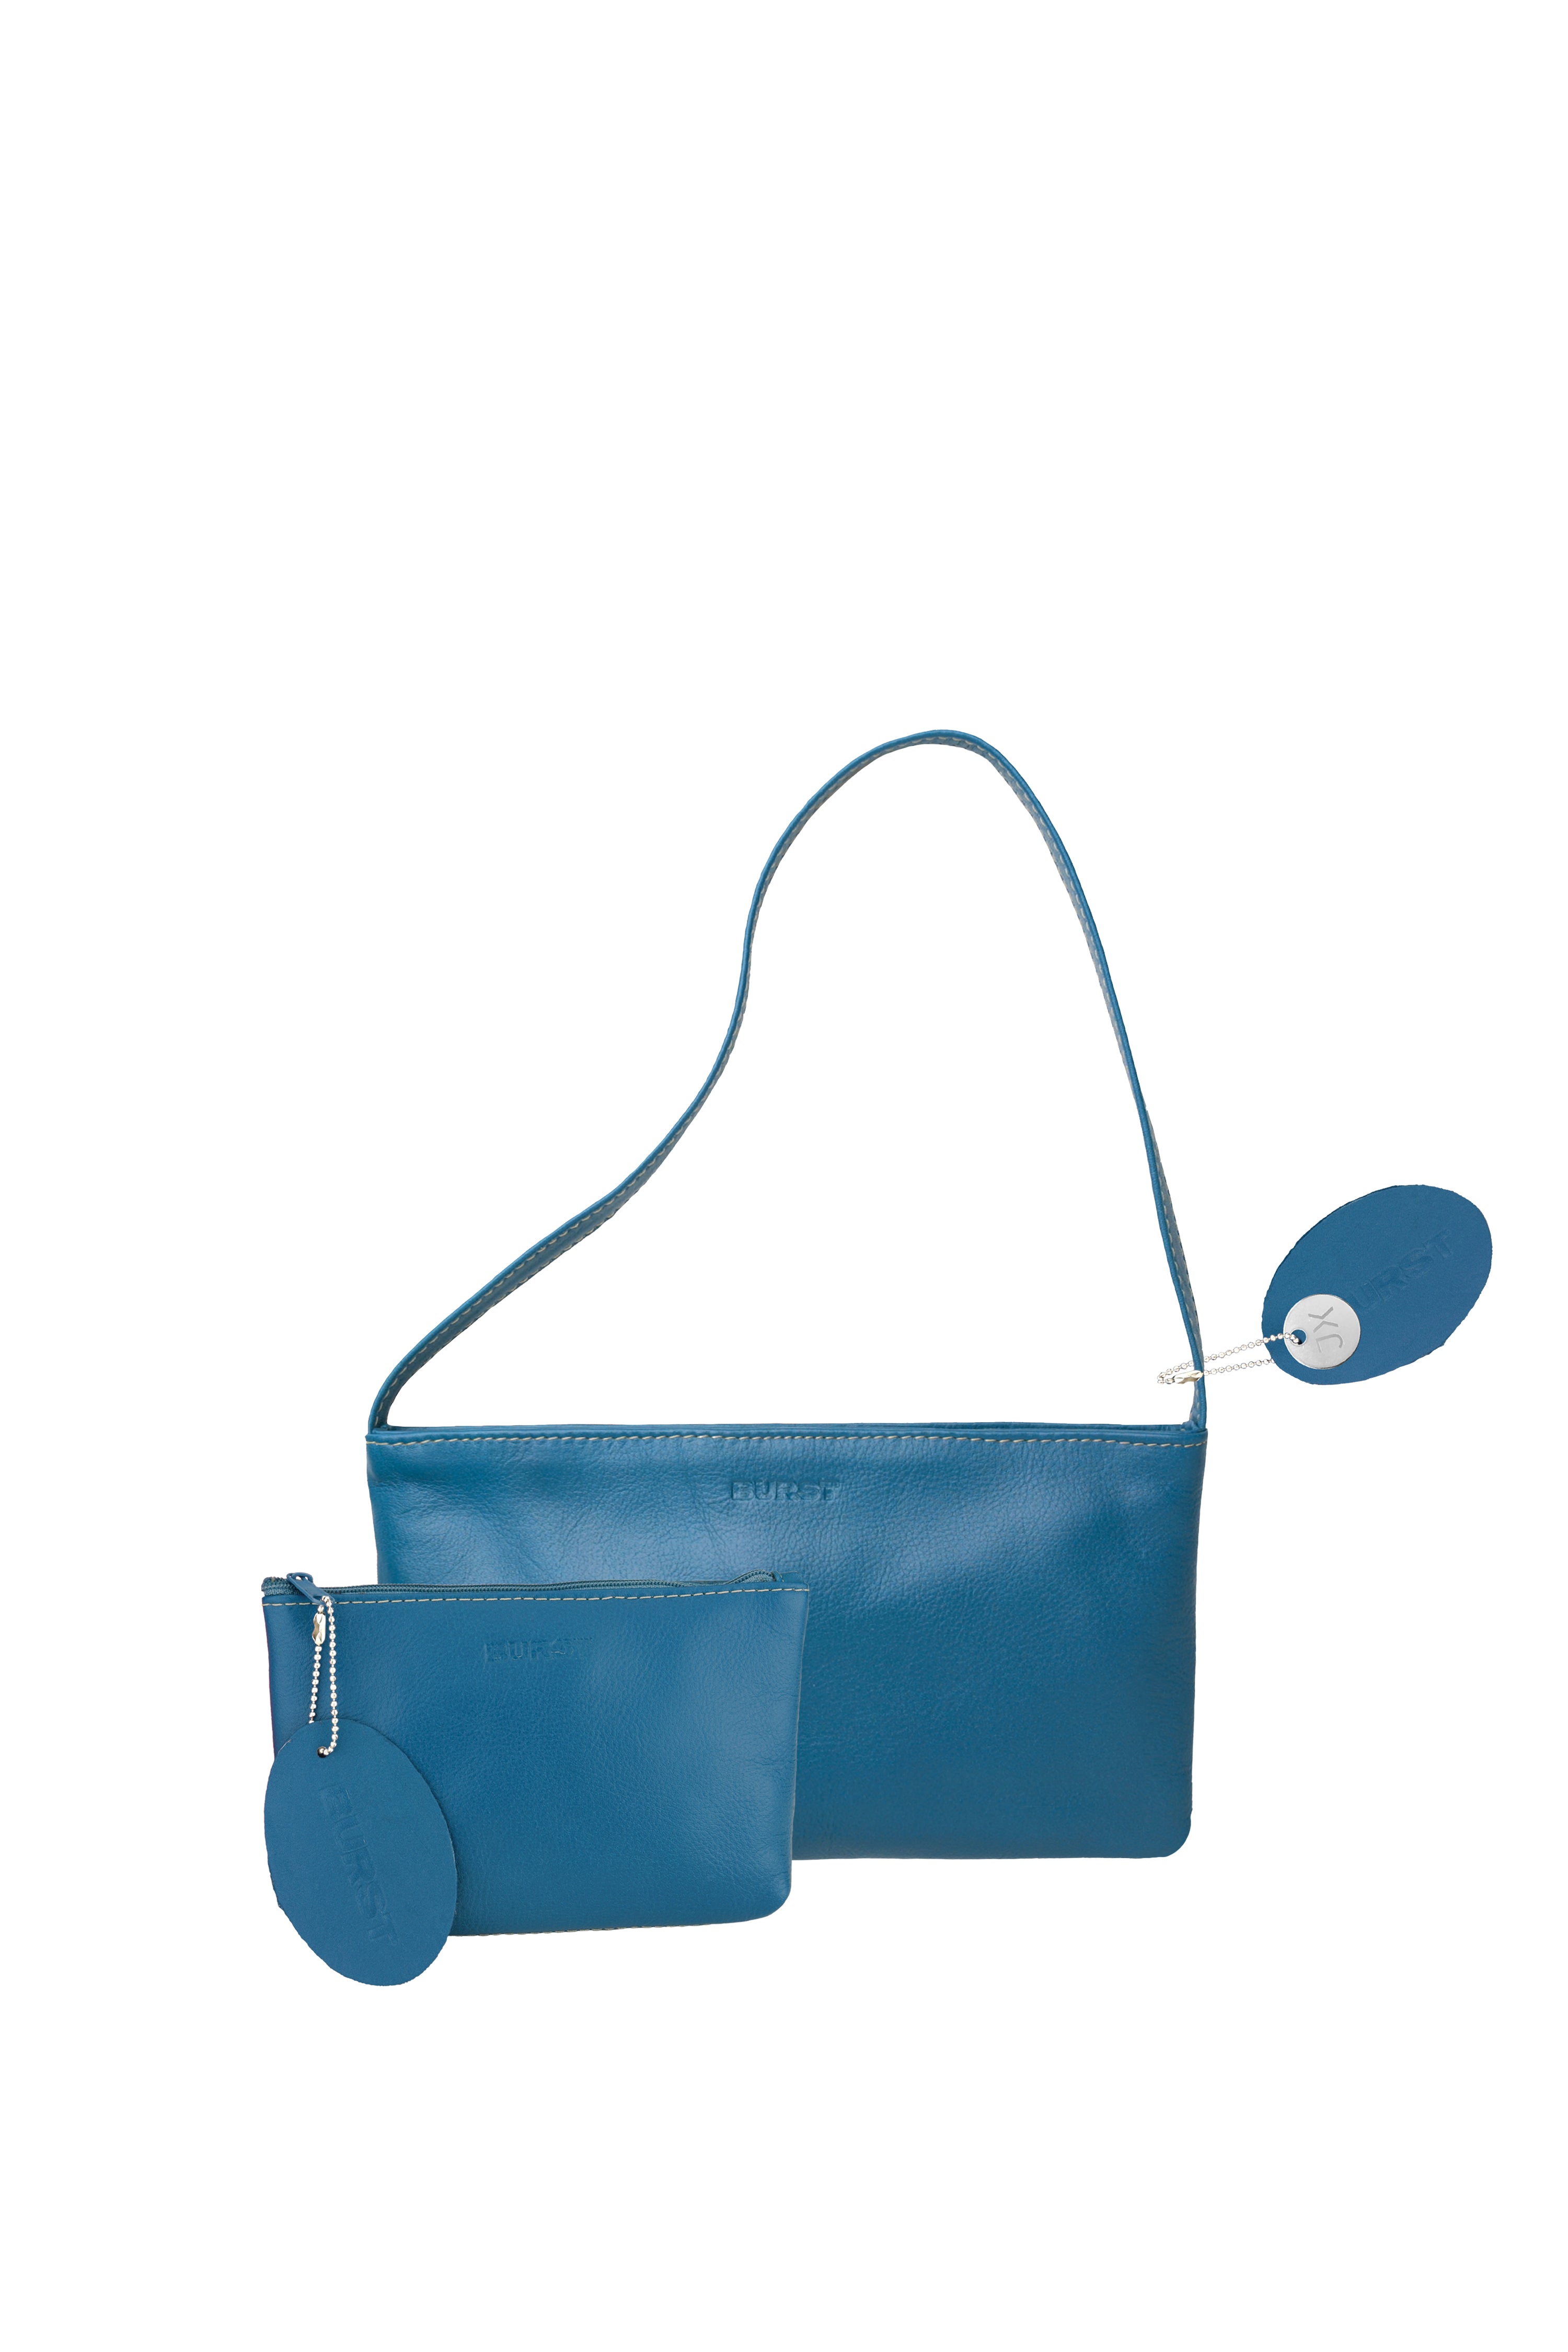 Small slim leather handbag, Mediterranean blue. Vivid light lemon lining and stitches. Zipper. Companion small leather zip pouch. Upcycled, sustainable